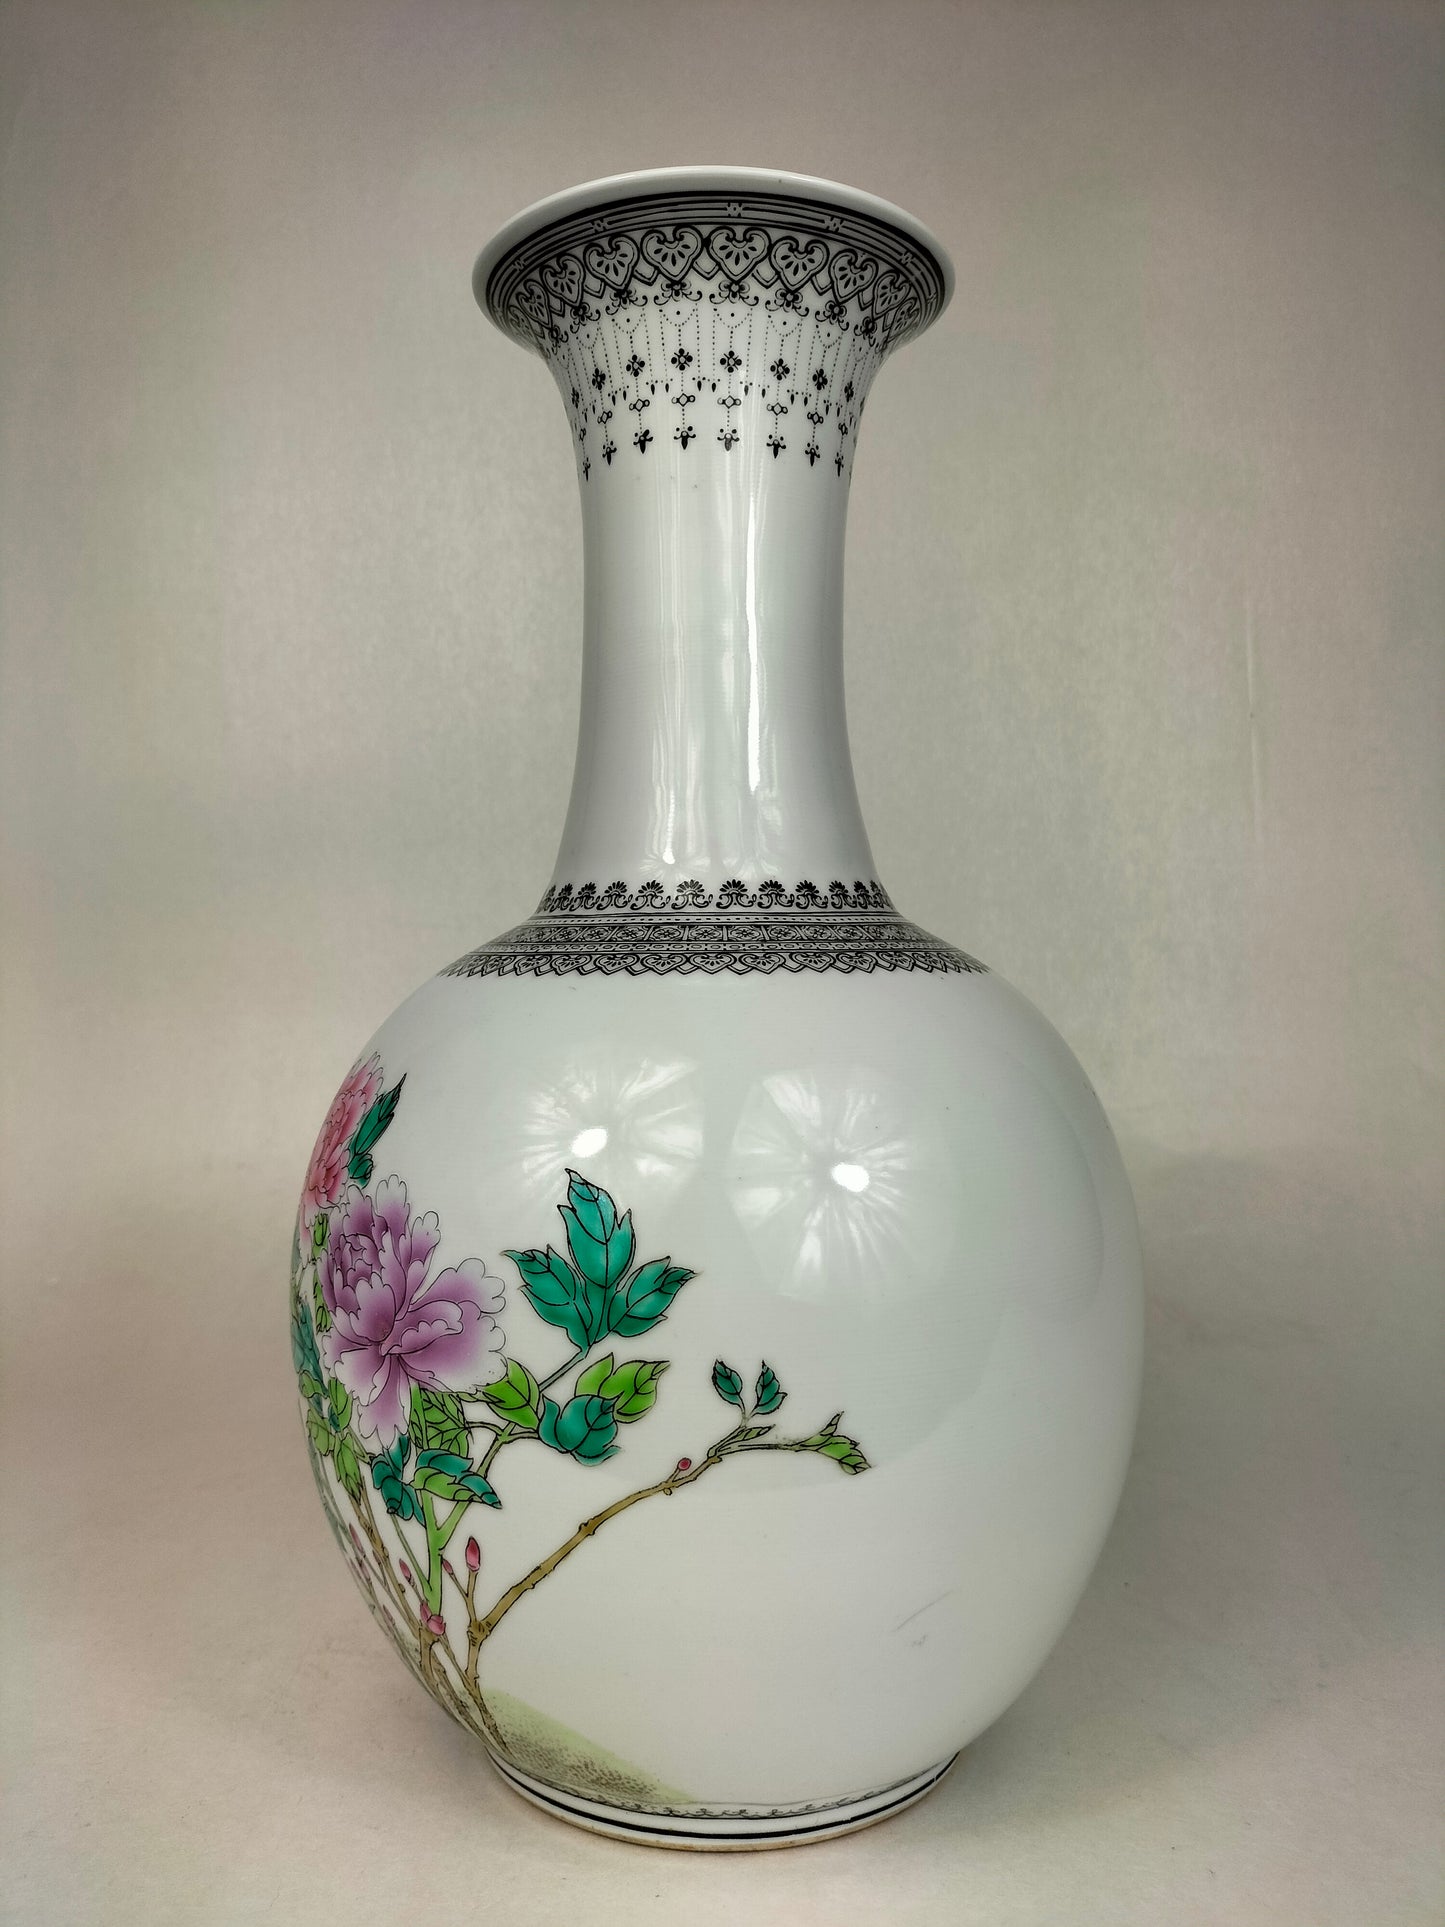 Vintage Chinese bottle vase decorated with flowers // Jingdezhen - 20th century